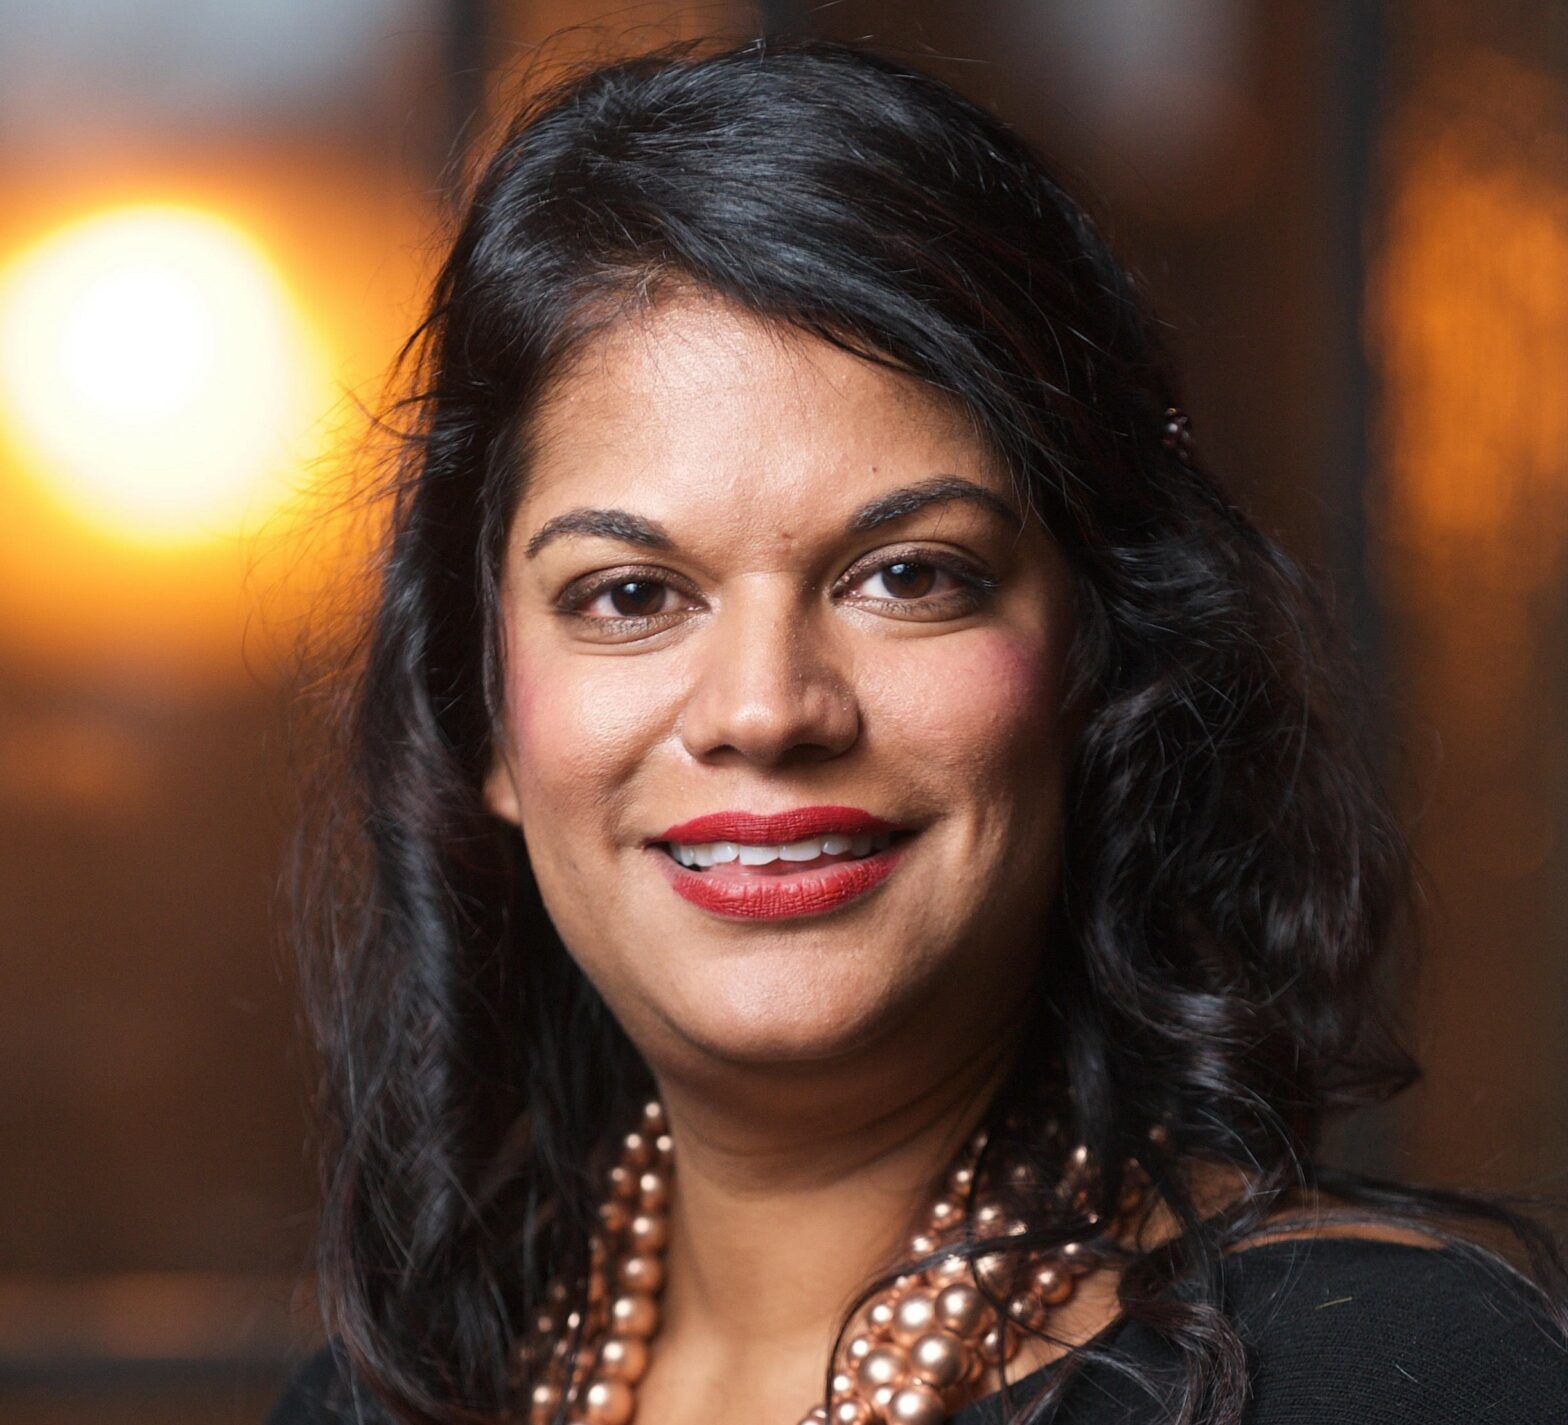 Podcast: City Hive CEO Bev Shah on owning up to diversity blindspots